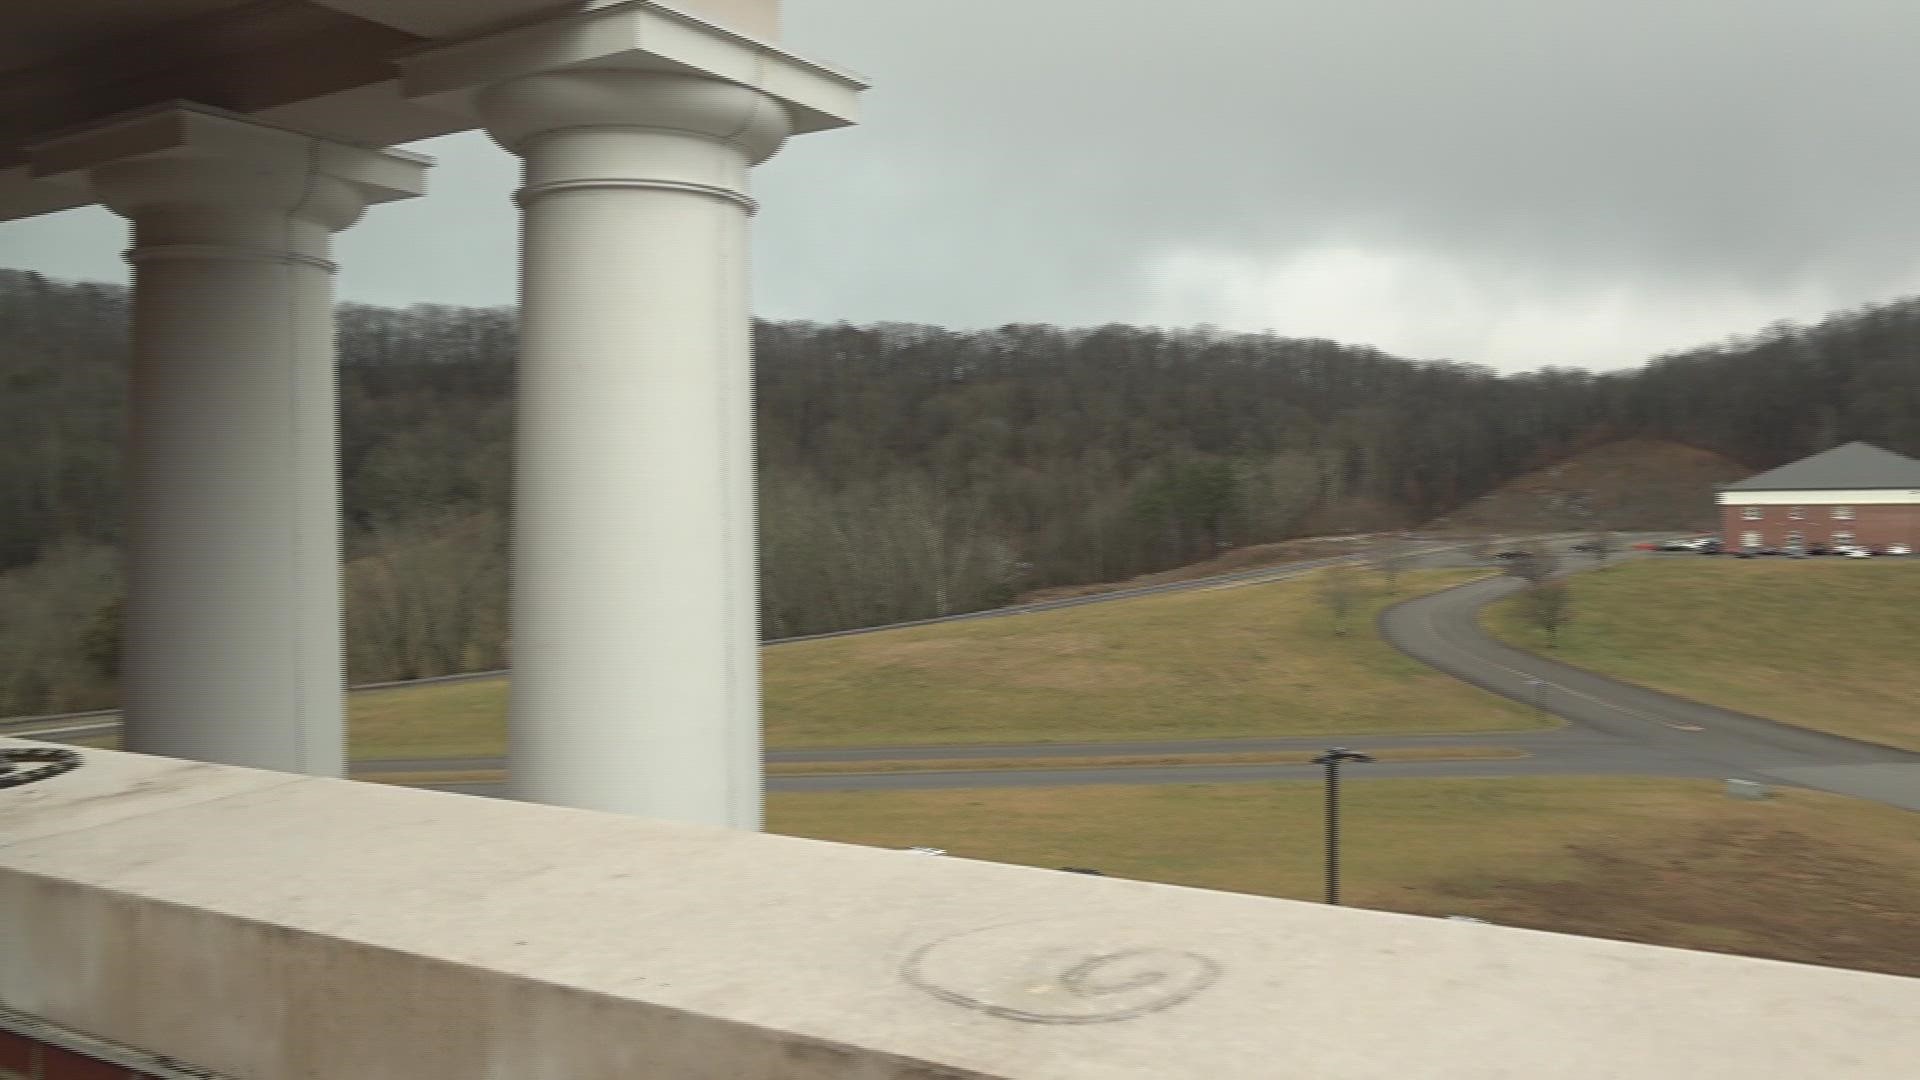 Lincoln Memorial University will soon provide a 4-year path for students in rural Appalachia.